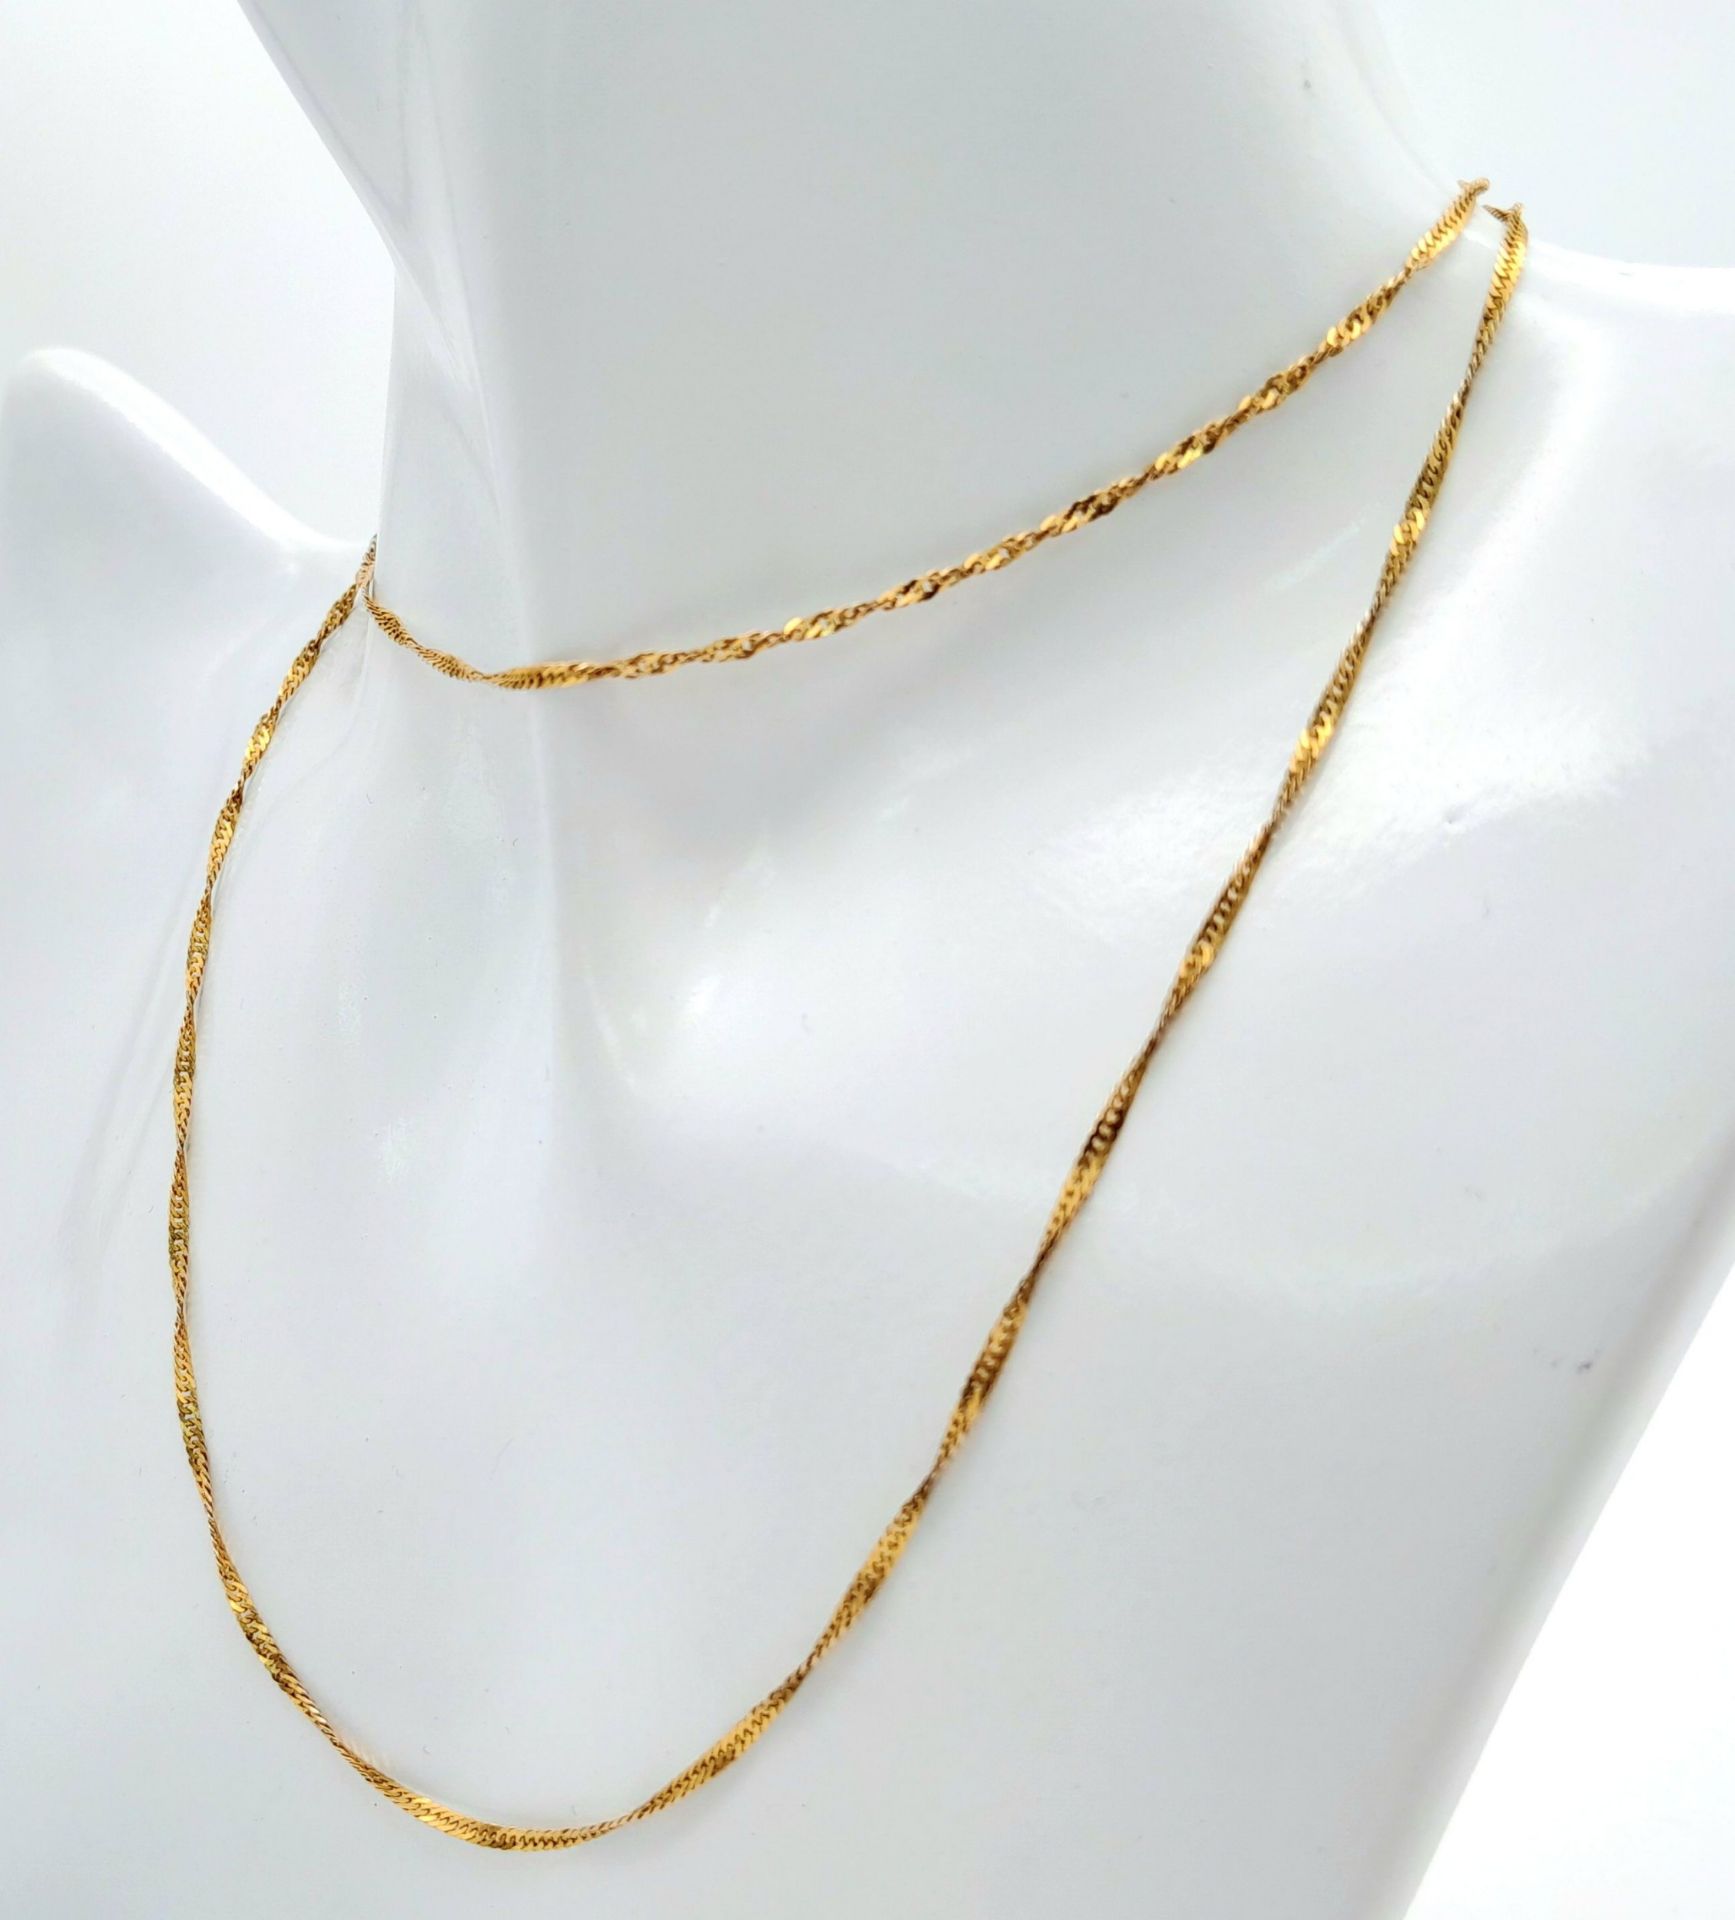 An elegant 9 K yellow gold rope chain necklace, length: 61 cm, weight: 2.3 g. - Image 9 of 11